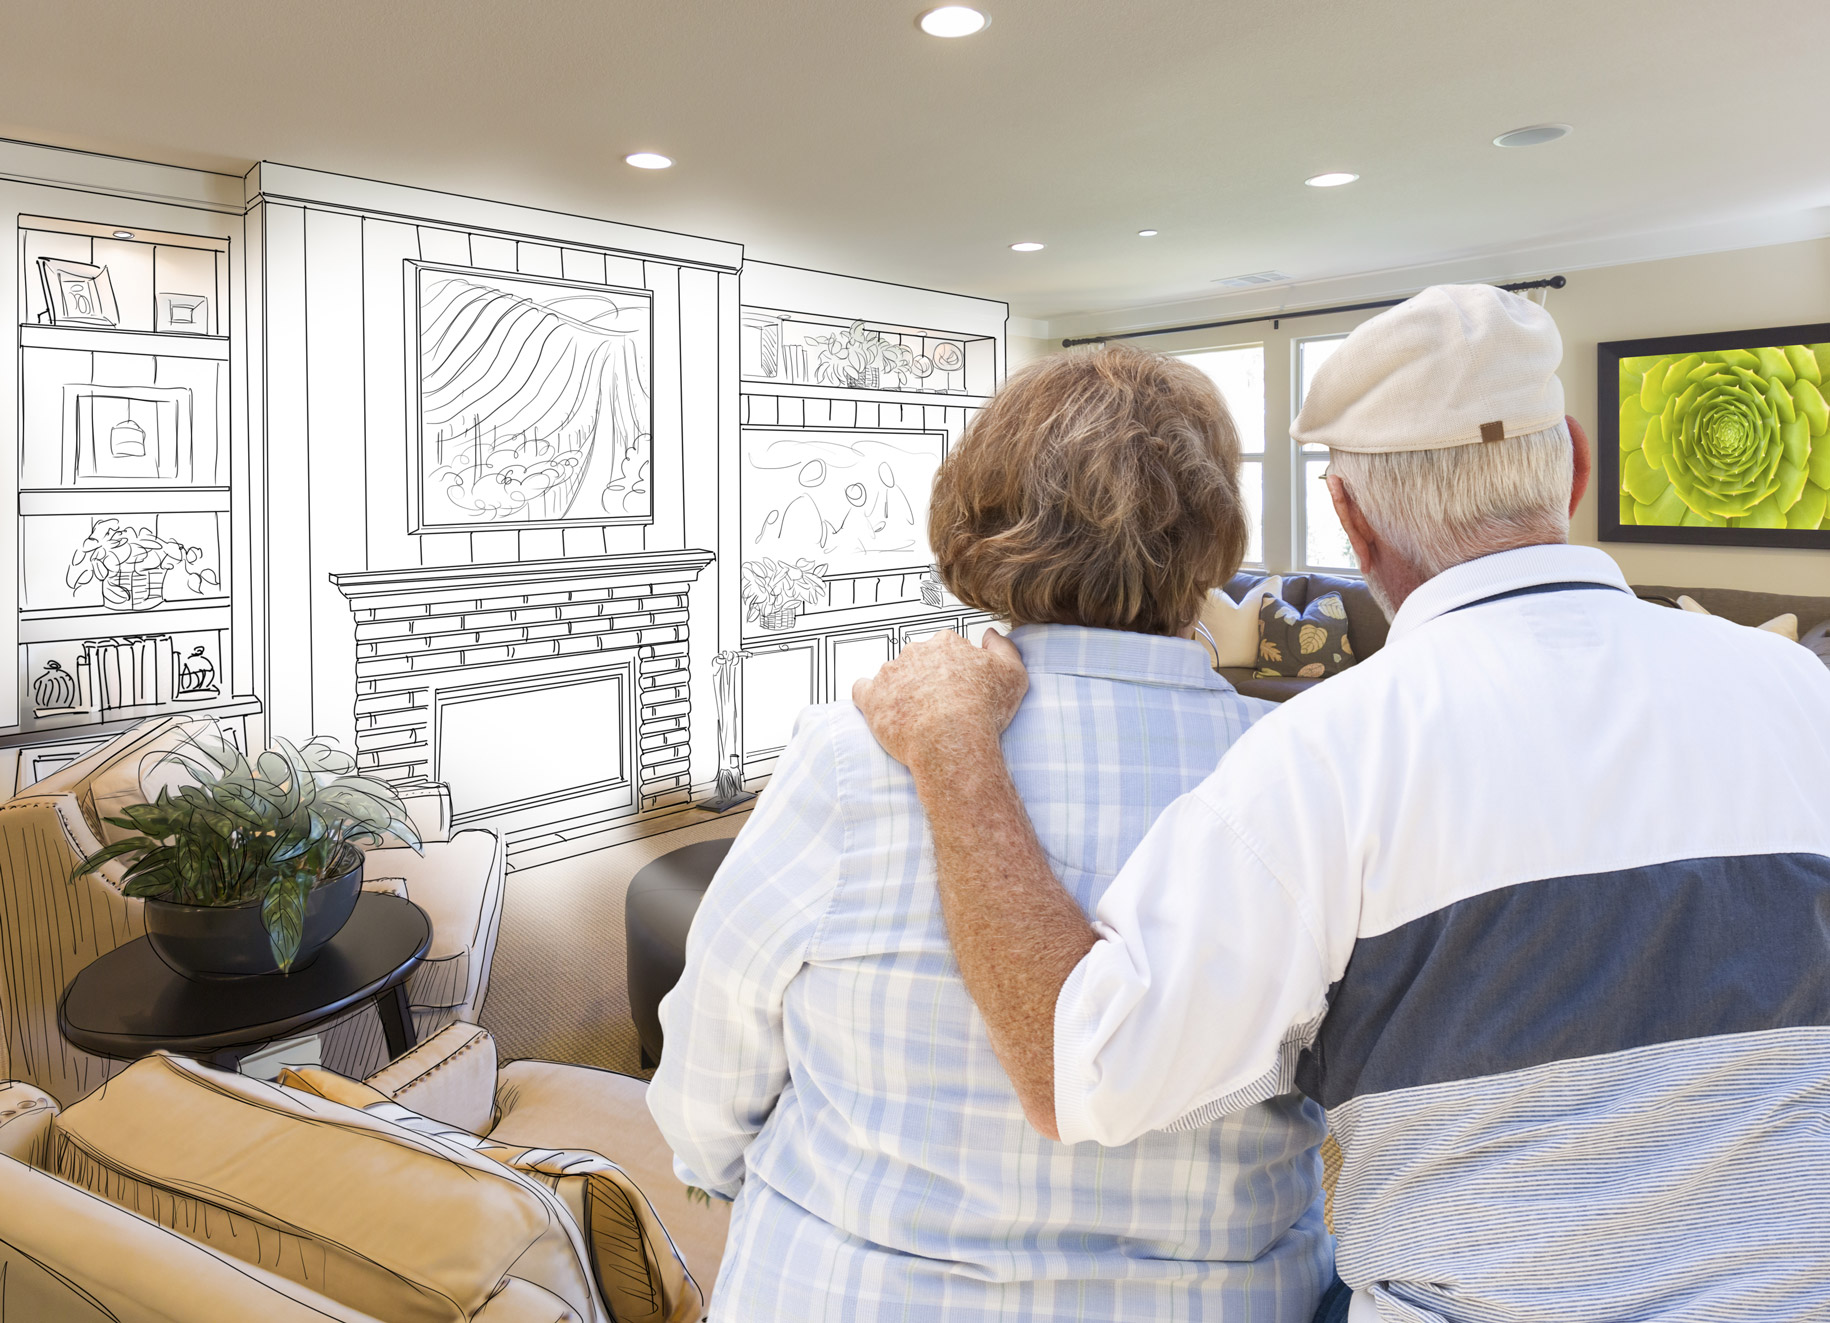 Cost and Quality Considerations in Senior Living Construction